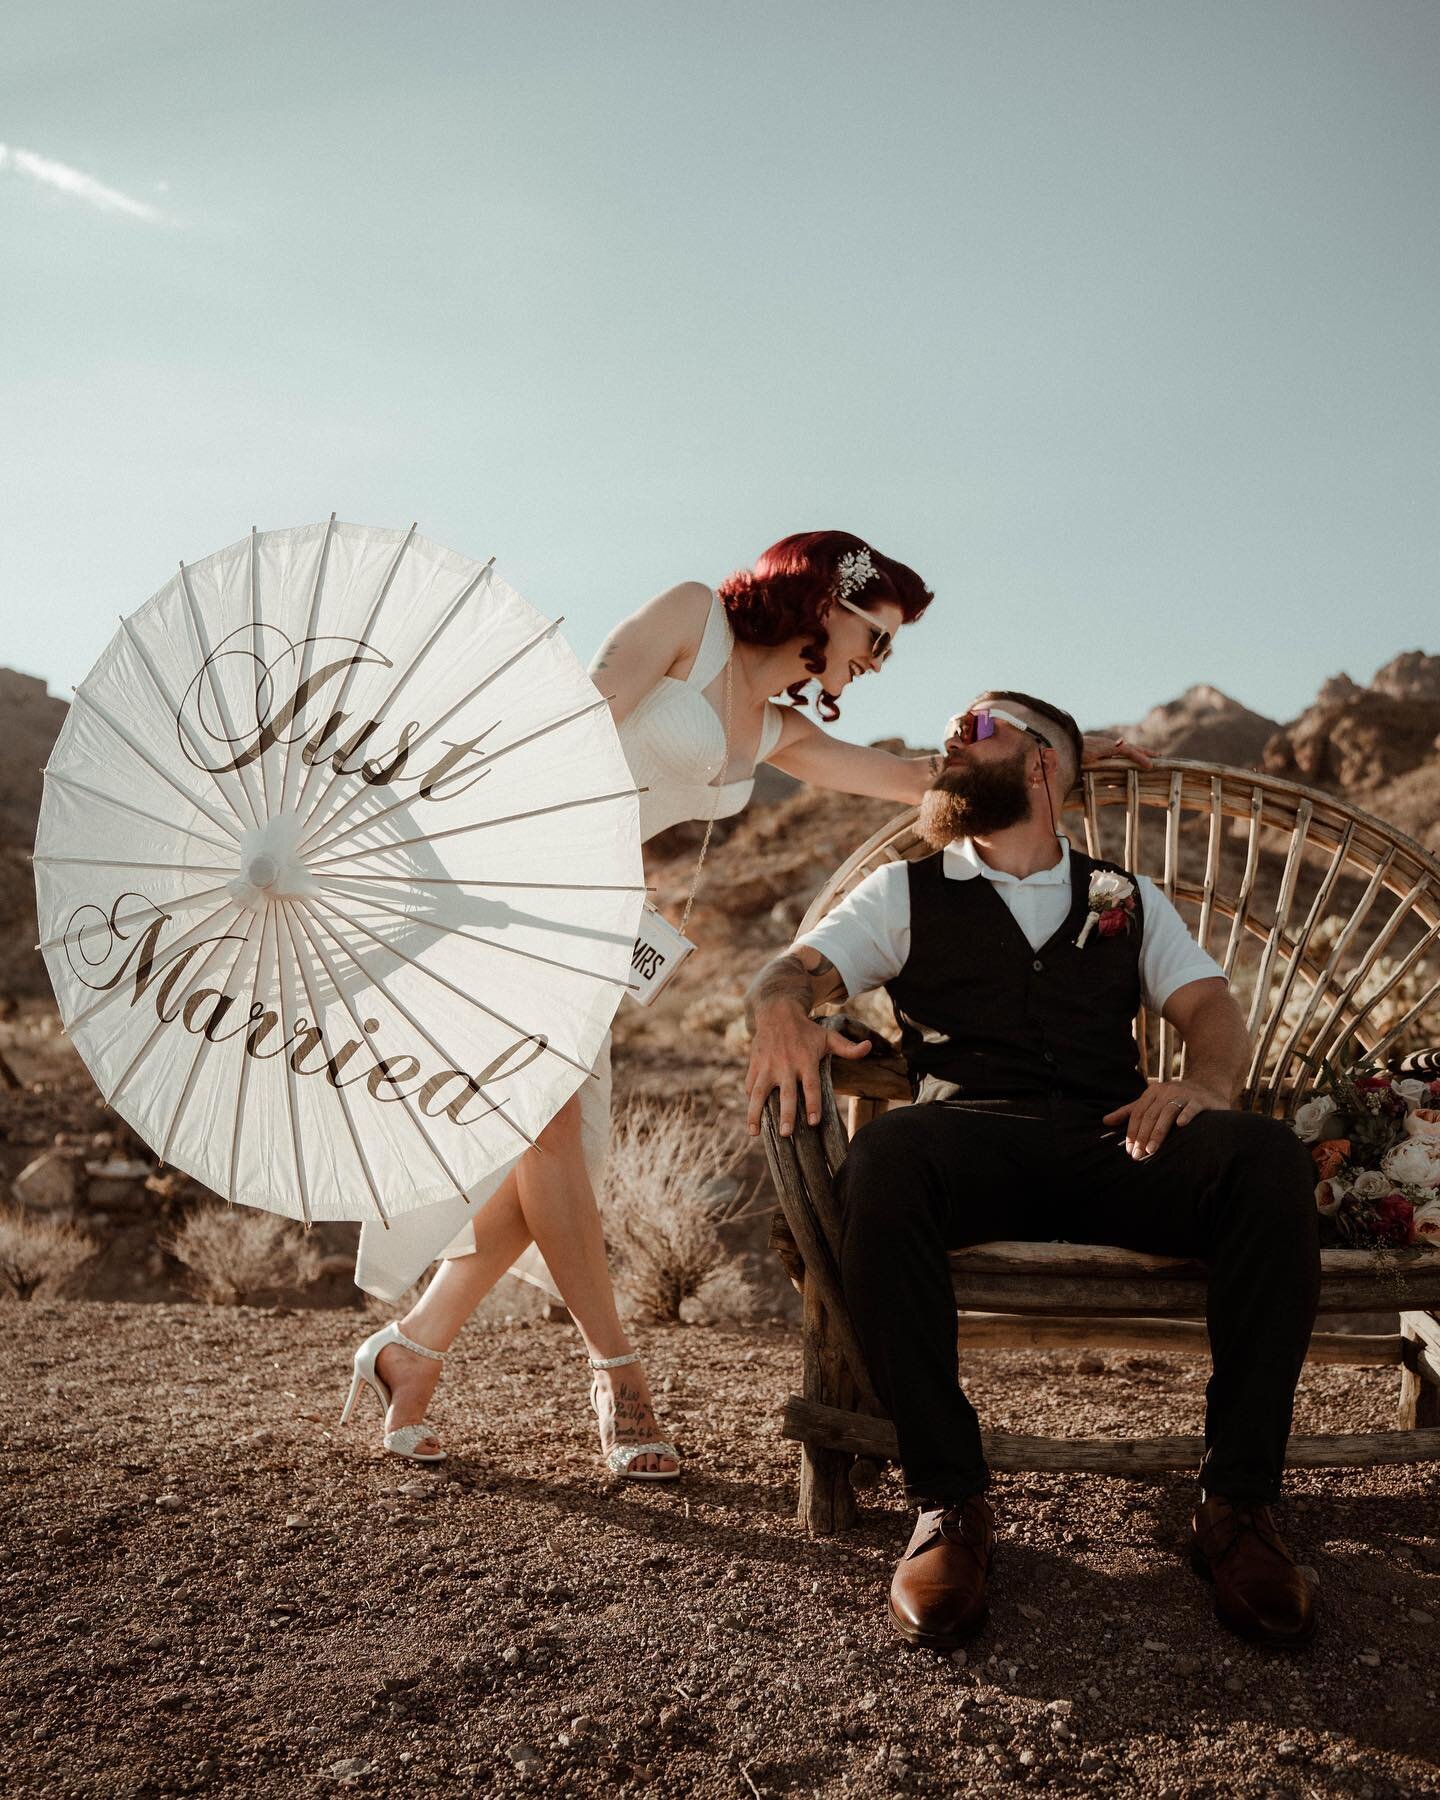 When you&rsquo;re a pin-up queen at your elopement. Love these two from Sweden
.
.
.
.
Shot dor @onyxandarrowphotography by @pzanardi.films 
#elopemement #vegasphotographer #vegasvideographer #elopementphotography #elopementlasvegas